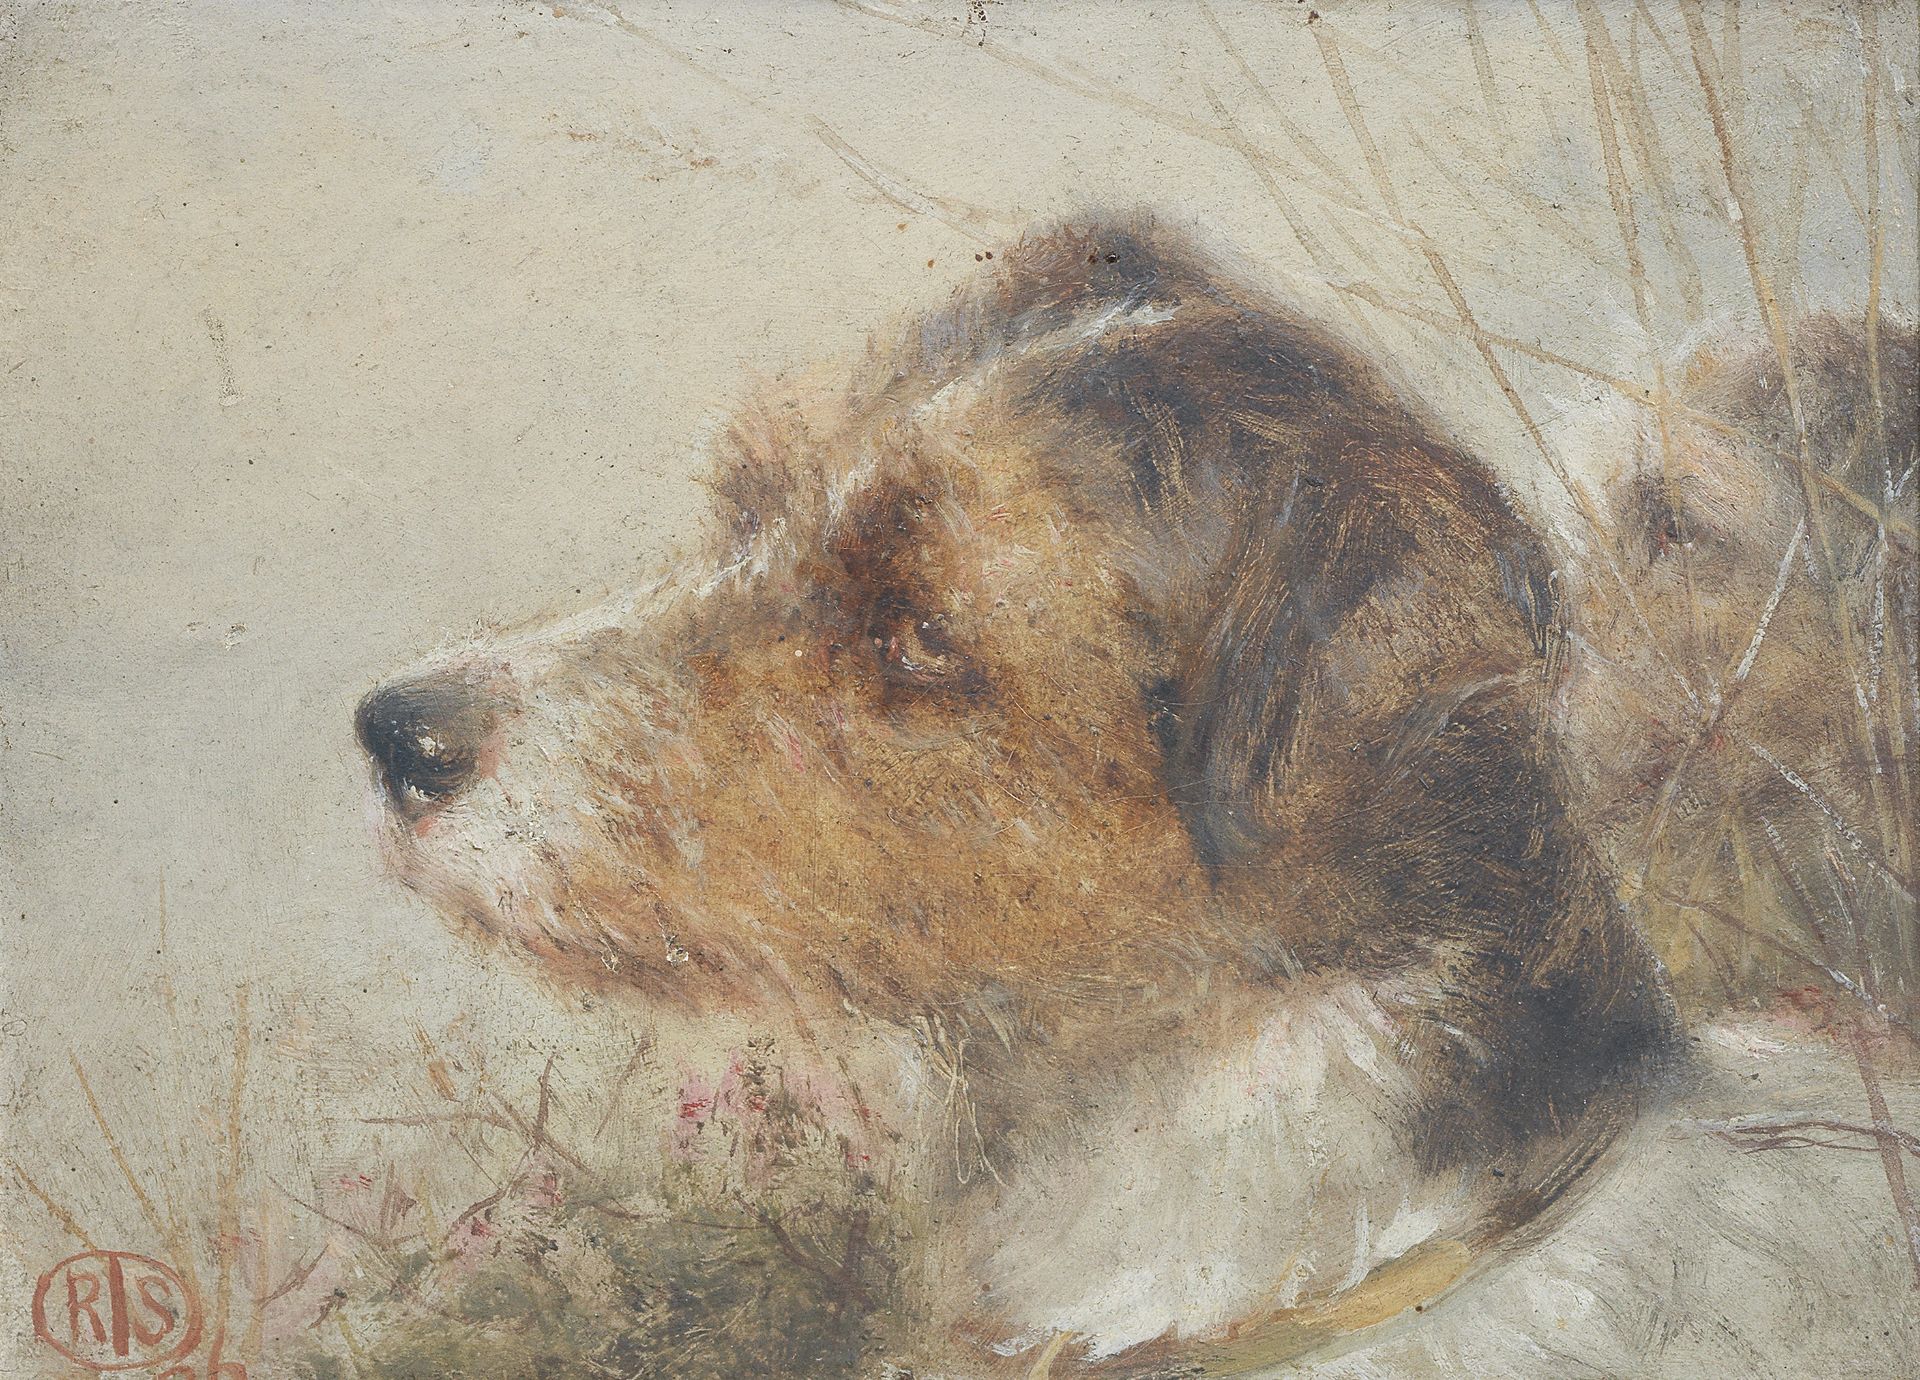 Richard S. Moseley (British, active 1862-1893) 'Go Bang' - A Phenomenal Wirehaired Terrier